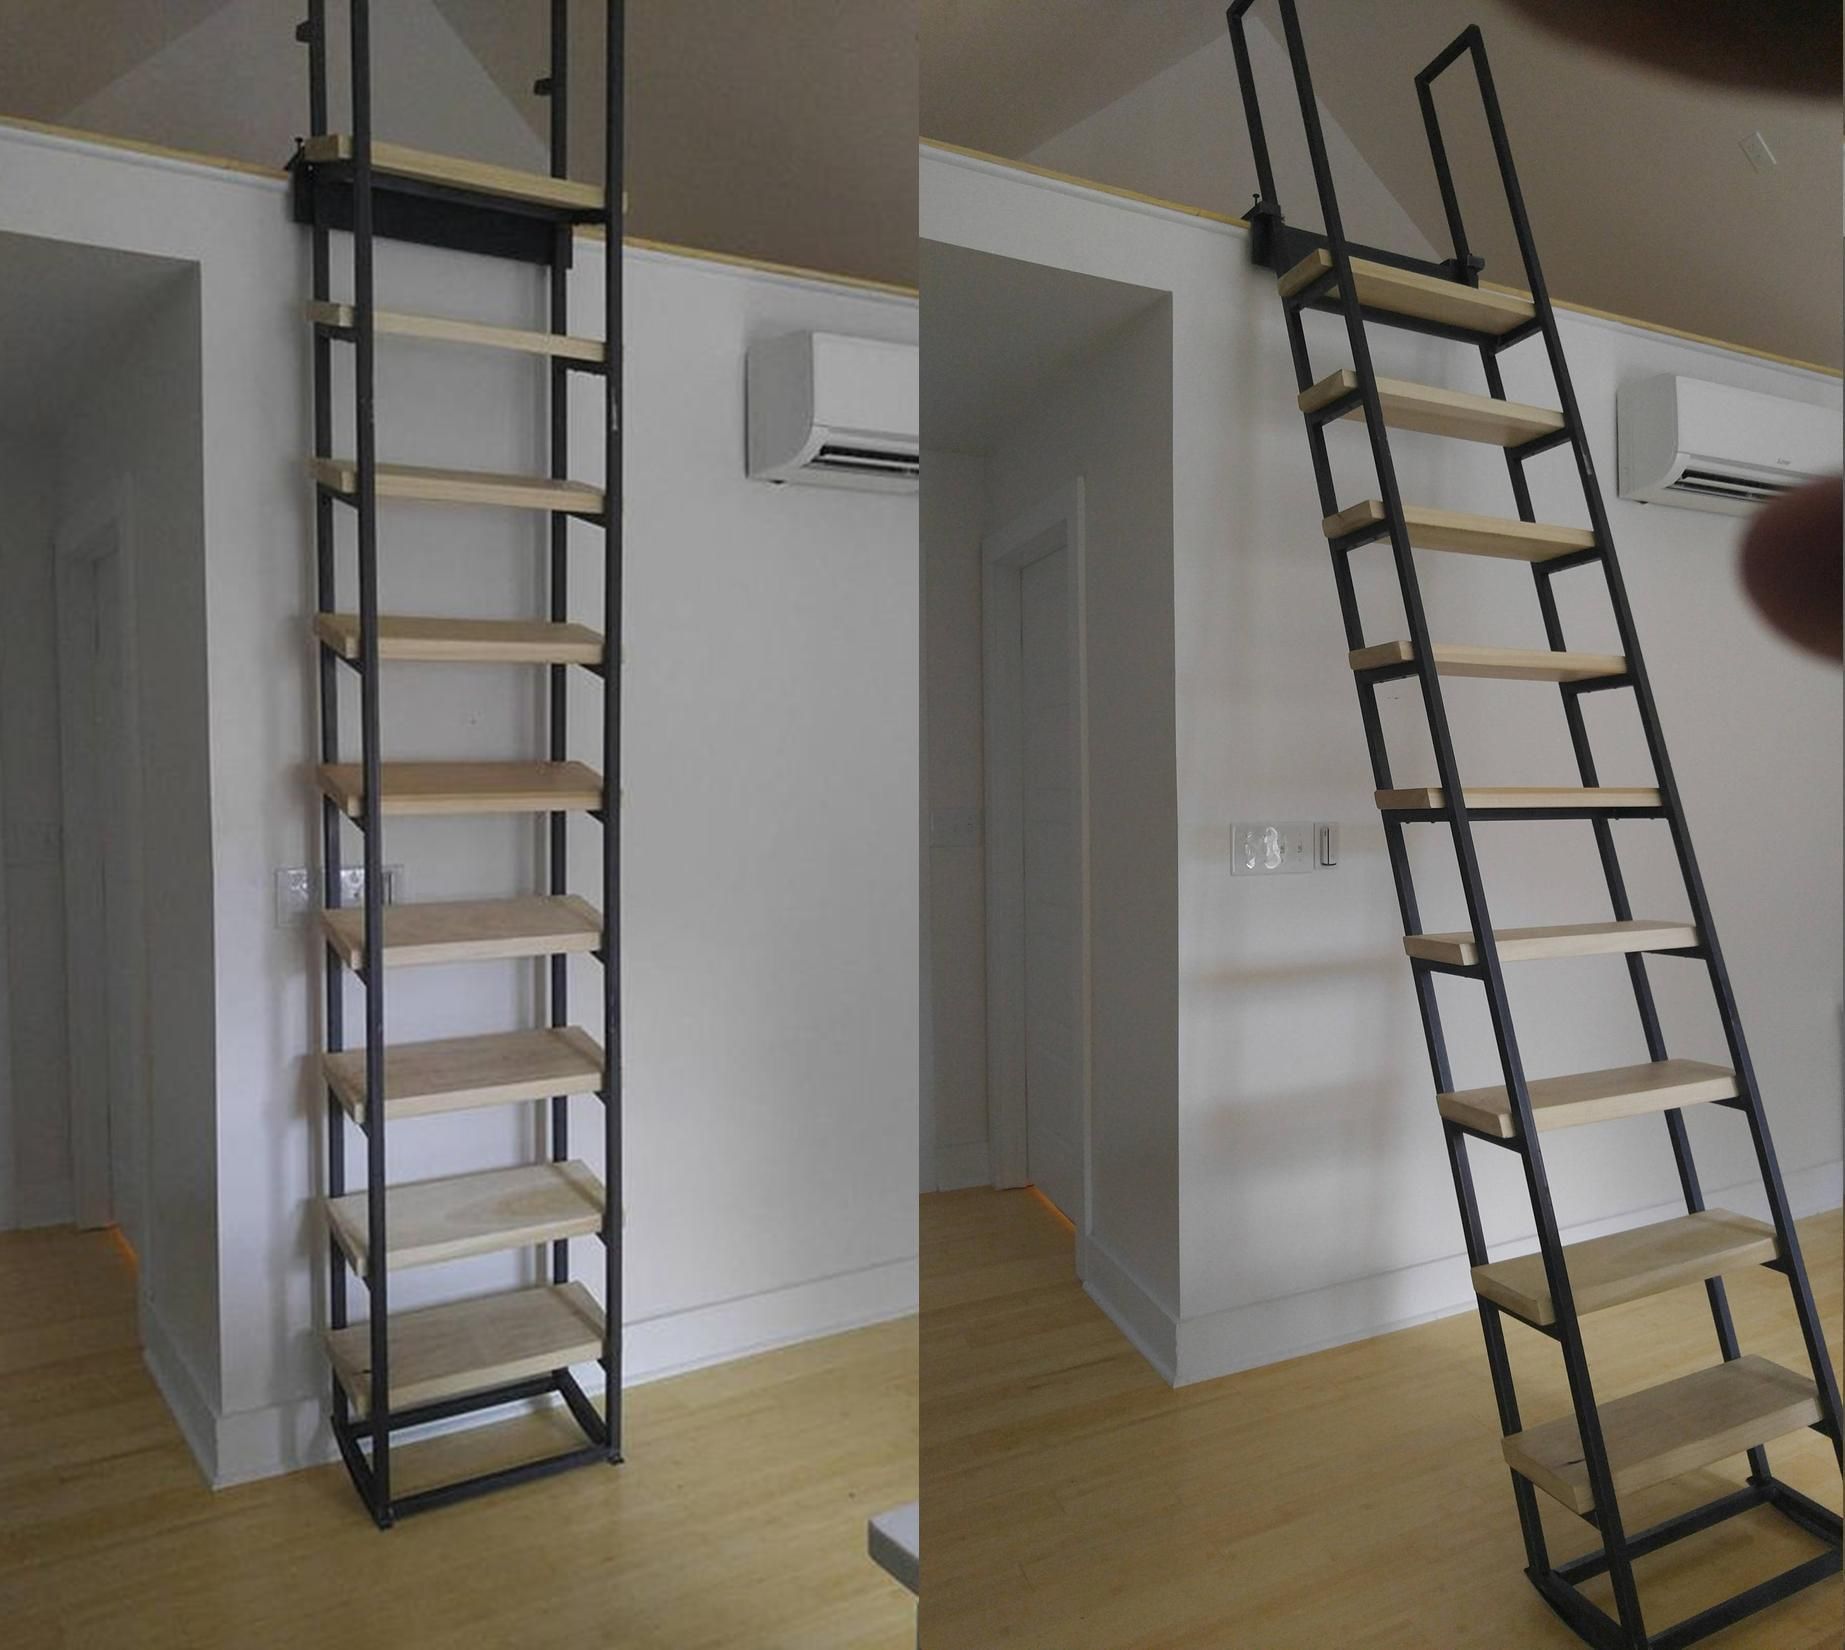 What are the advantages of installing a loft ladder or. buying one?